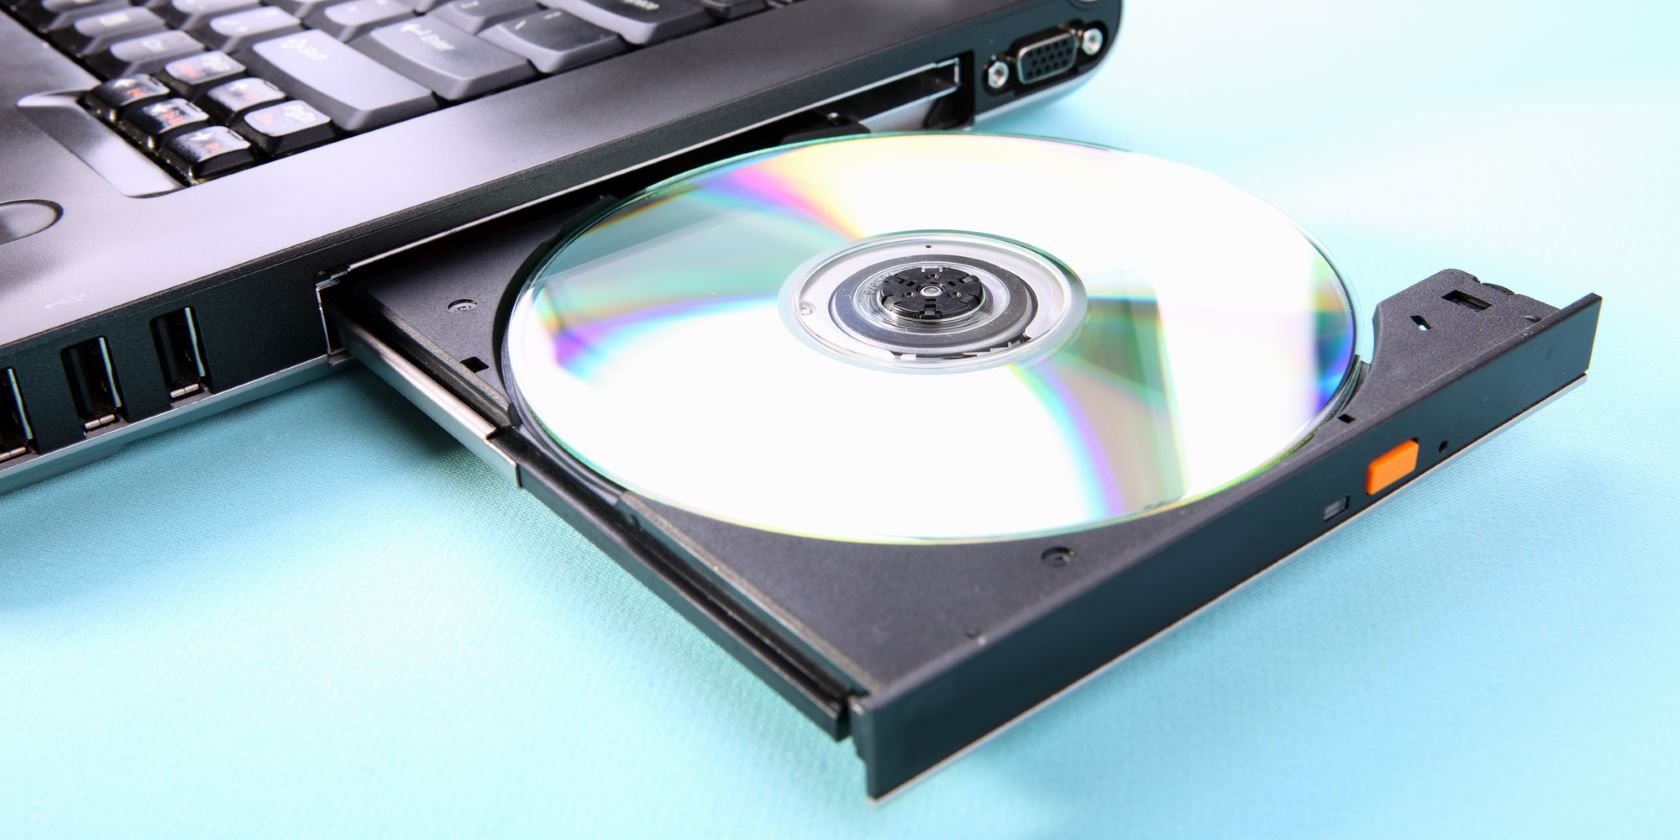 How to Fix a Scratched DVD or CD